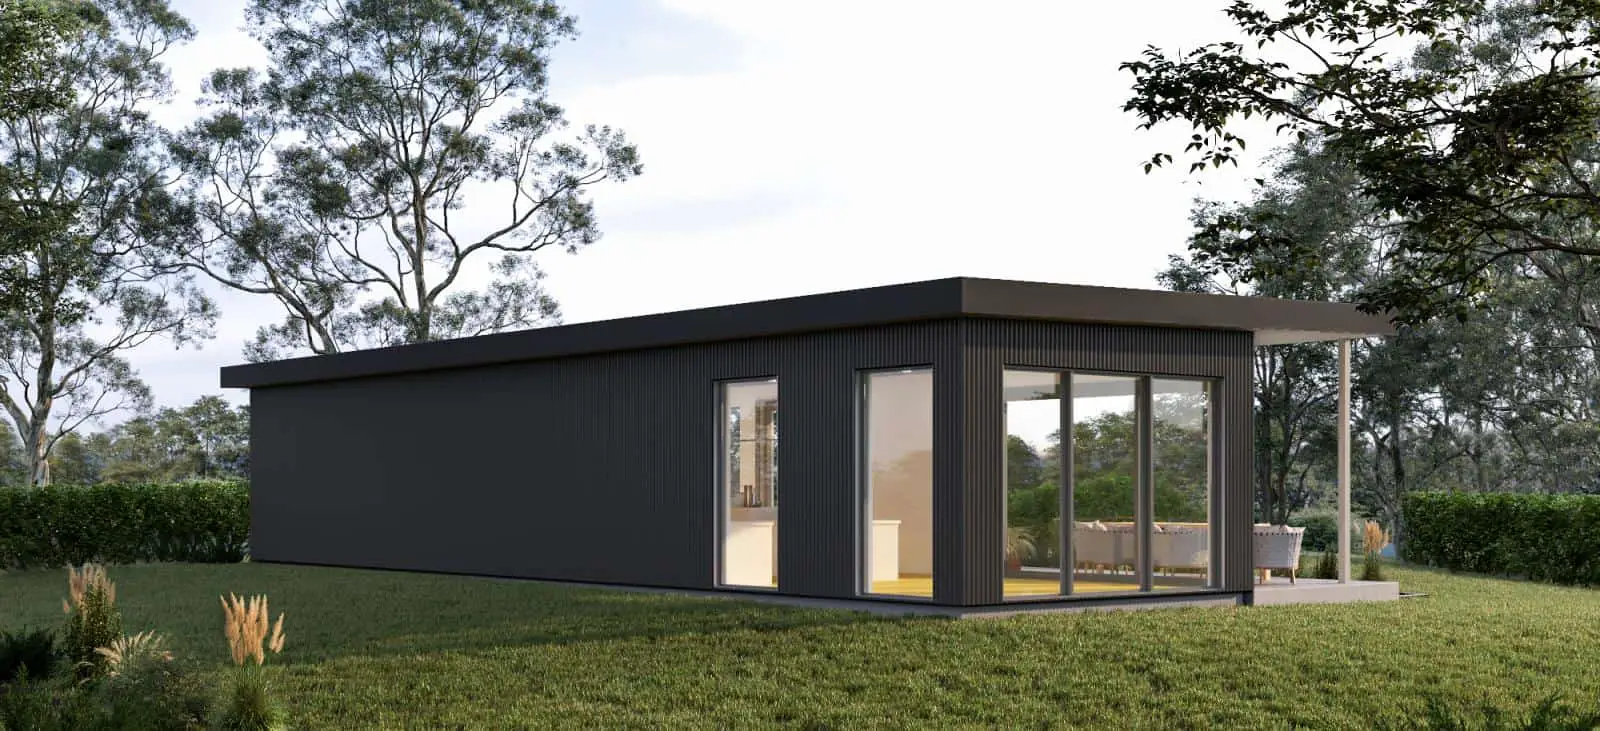 Angora Modern Cottage small prefab modular home or ADU by Dvele - exterior side and rear view.